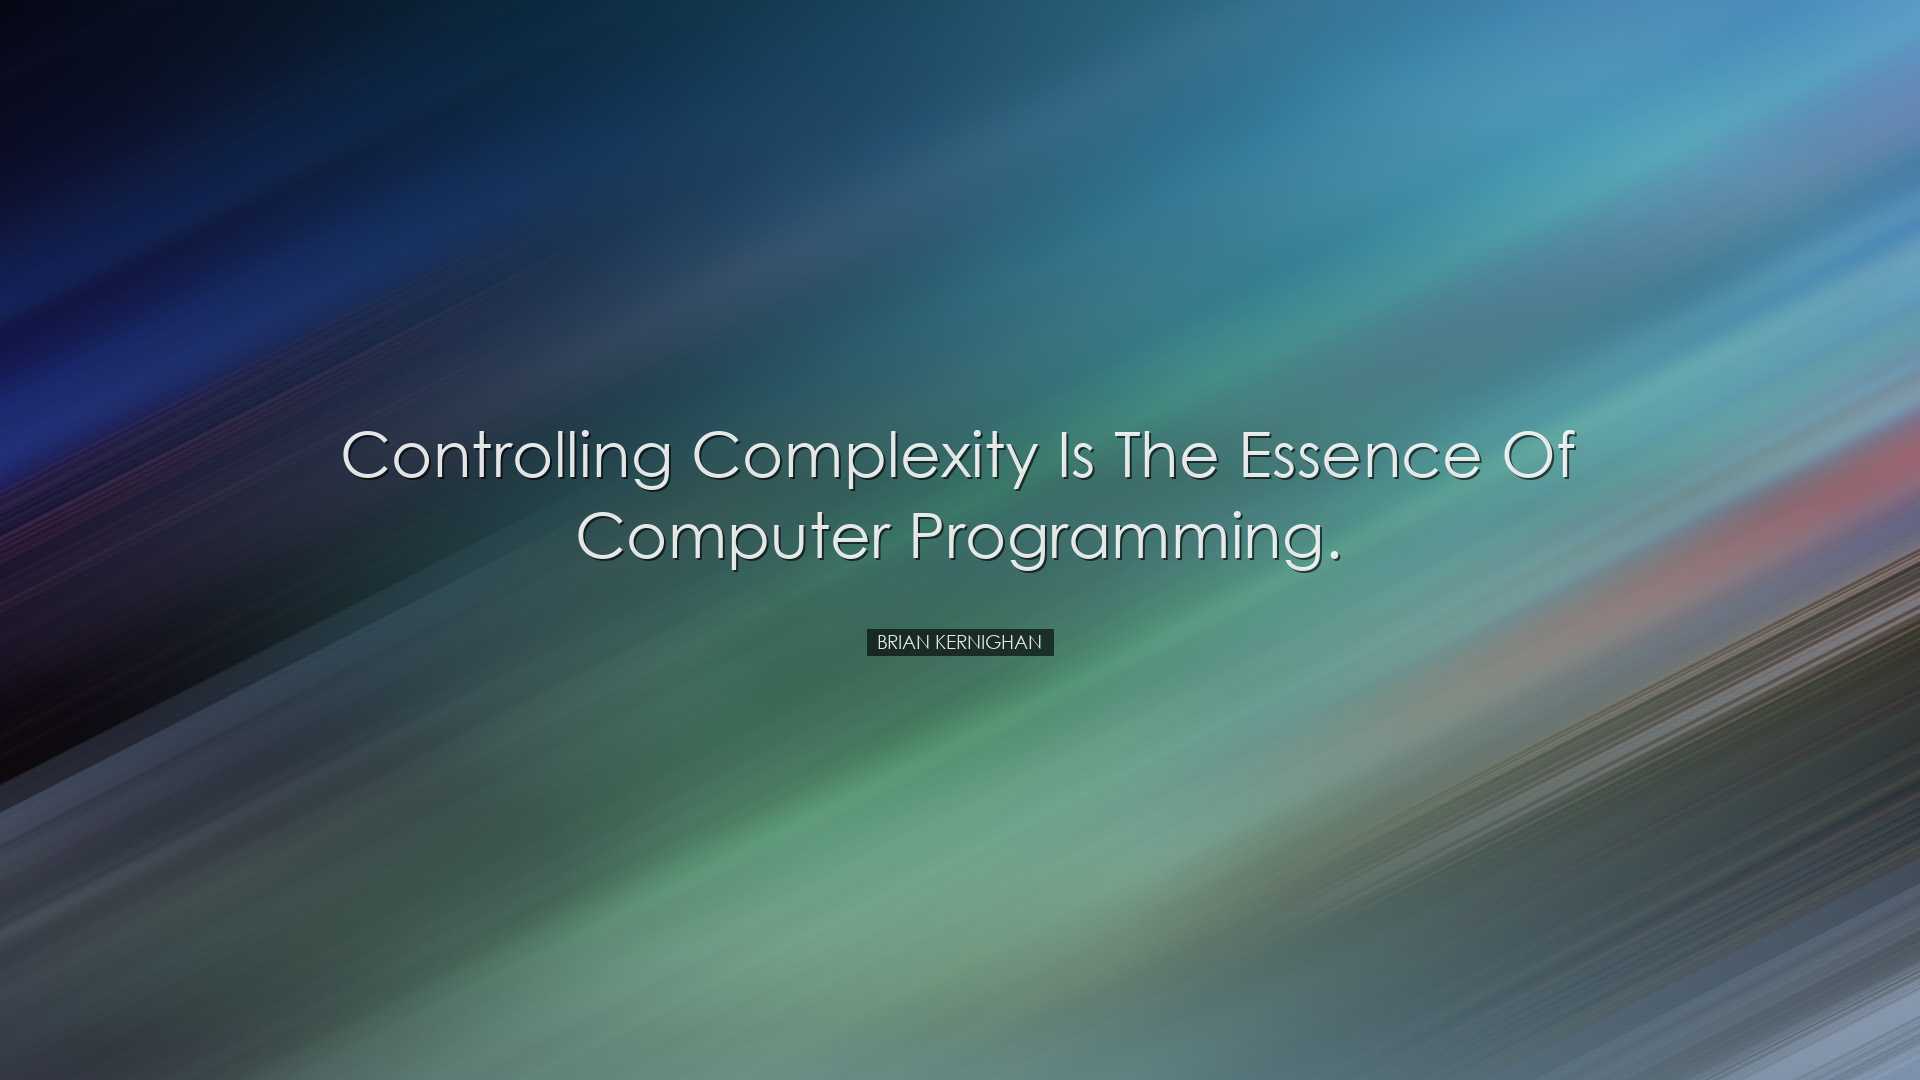 Controlling complexity is the essence of computer programming. - B